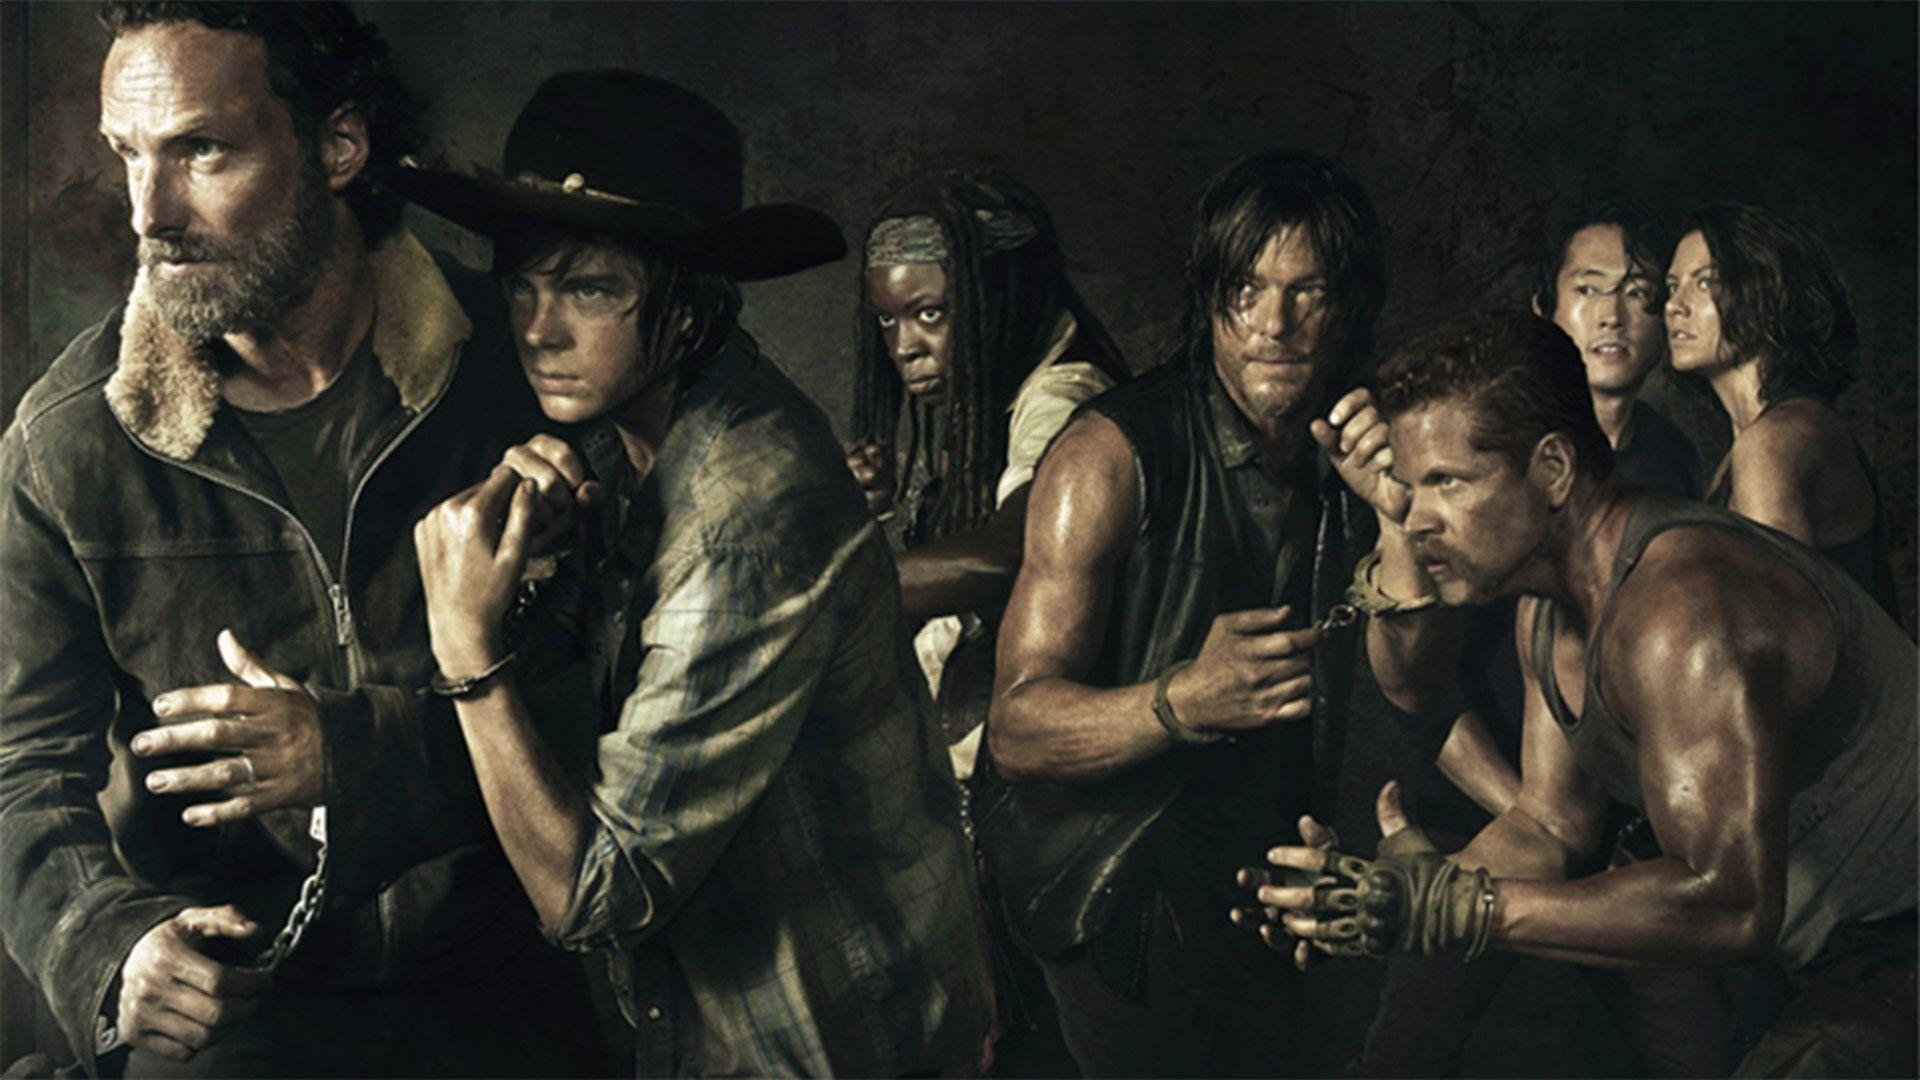 Walking Dead': What the Cast Is Working On Next